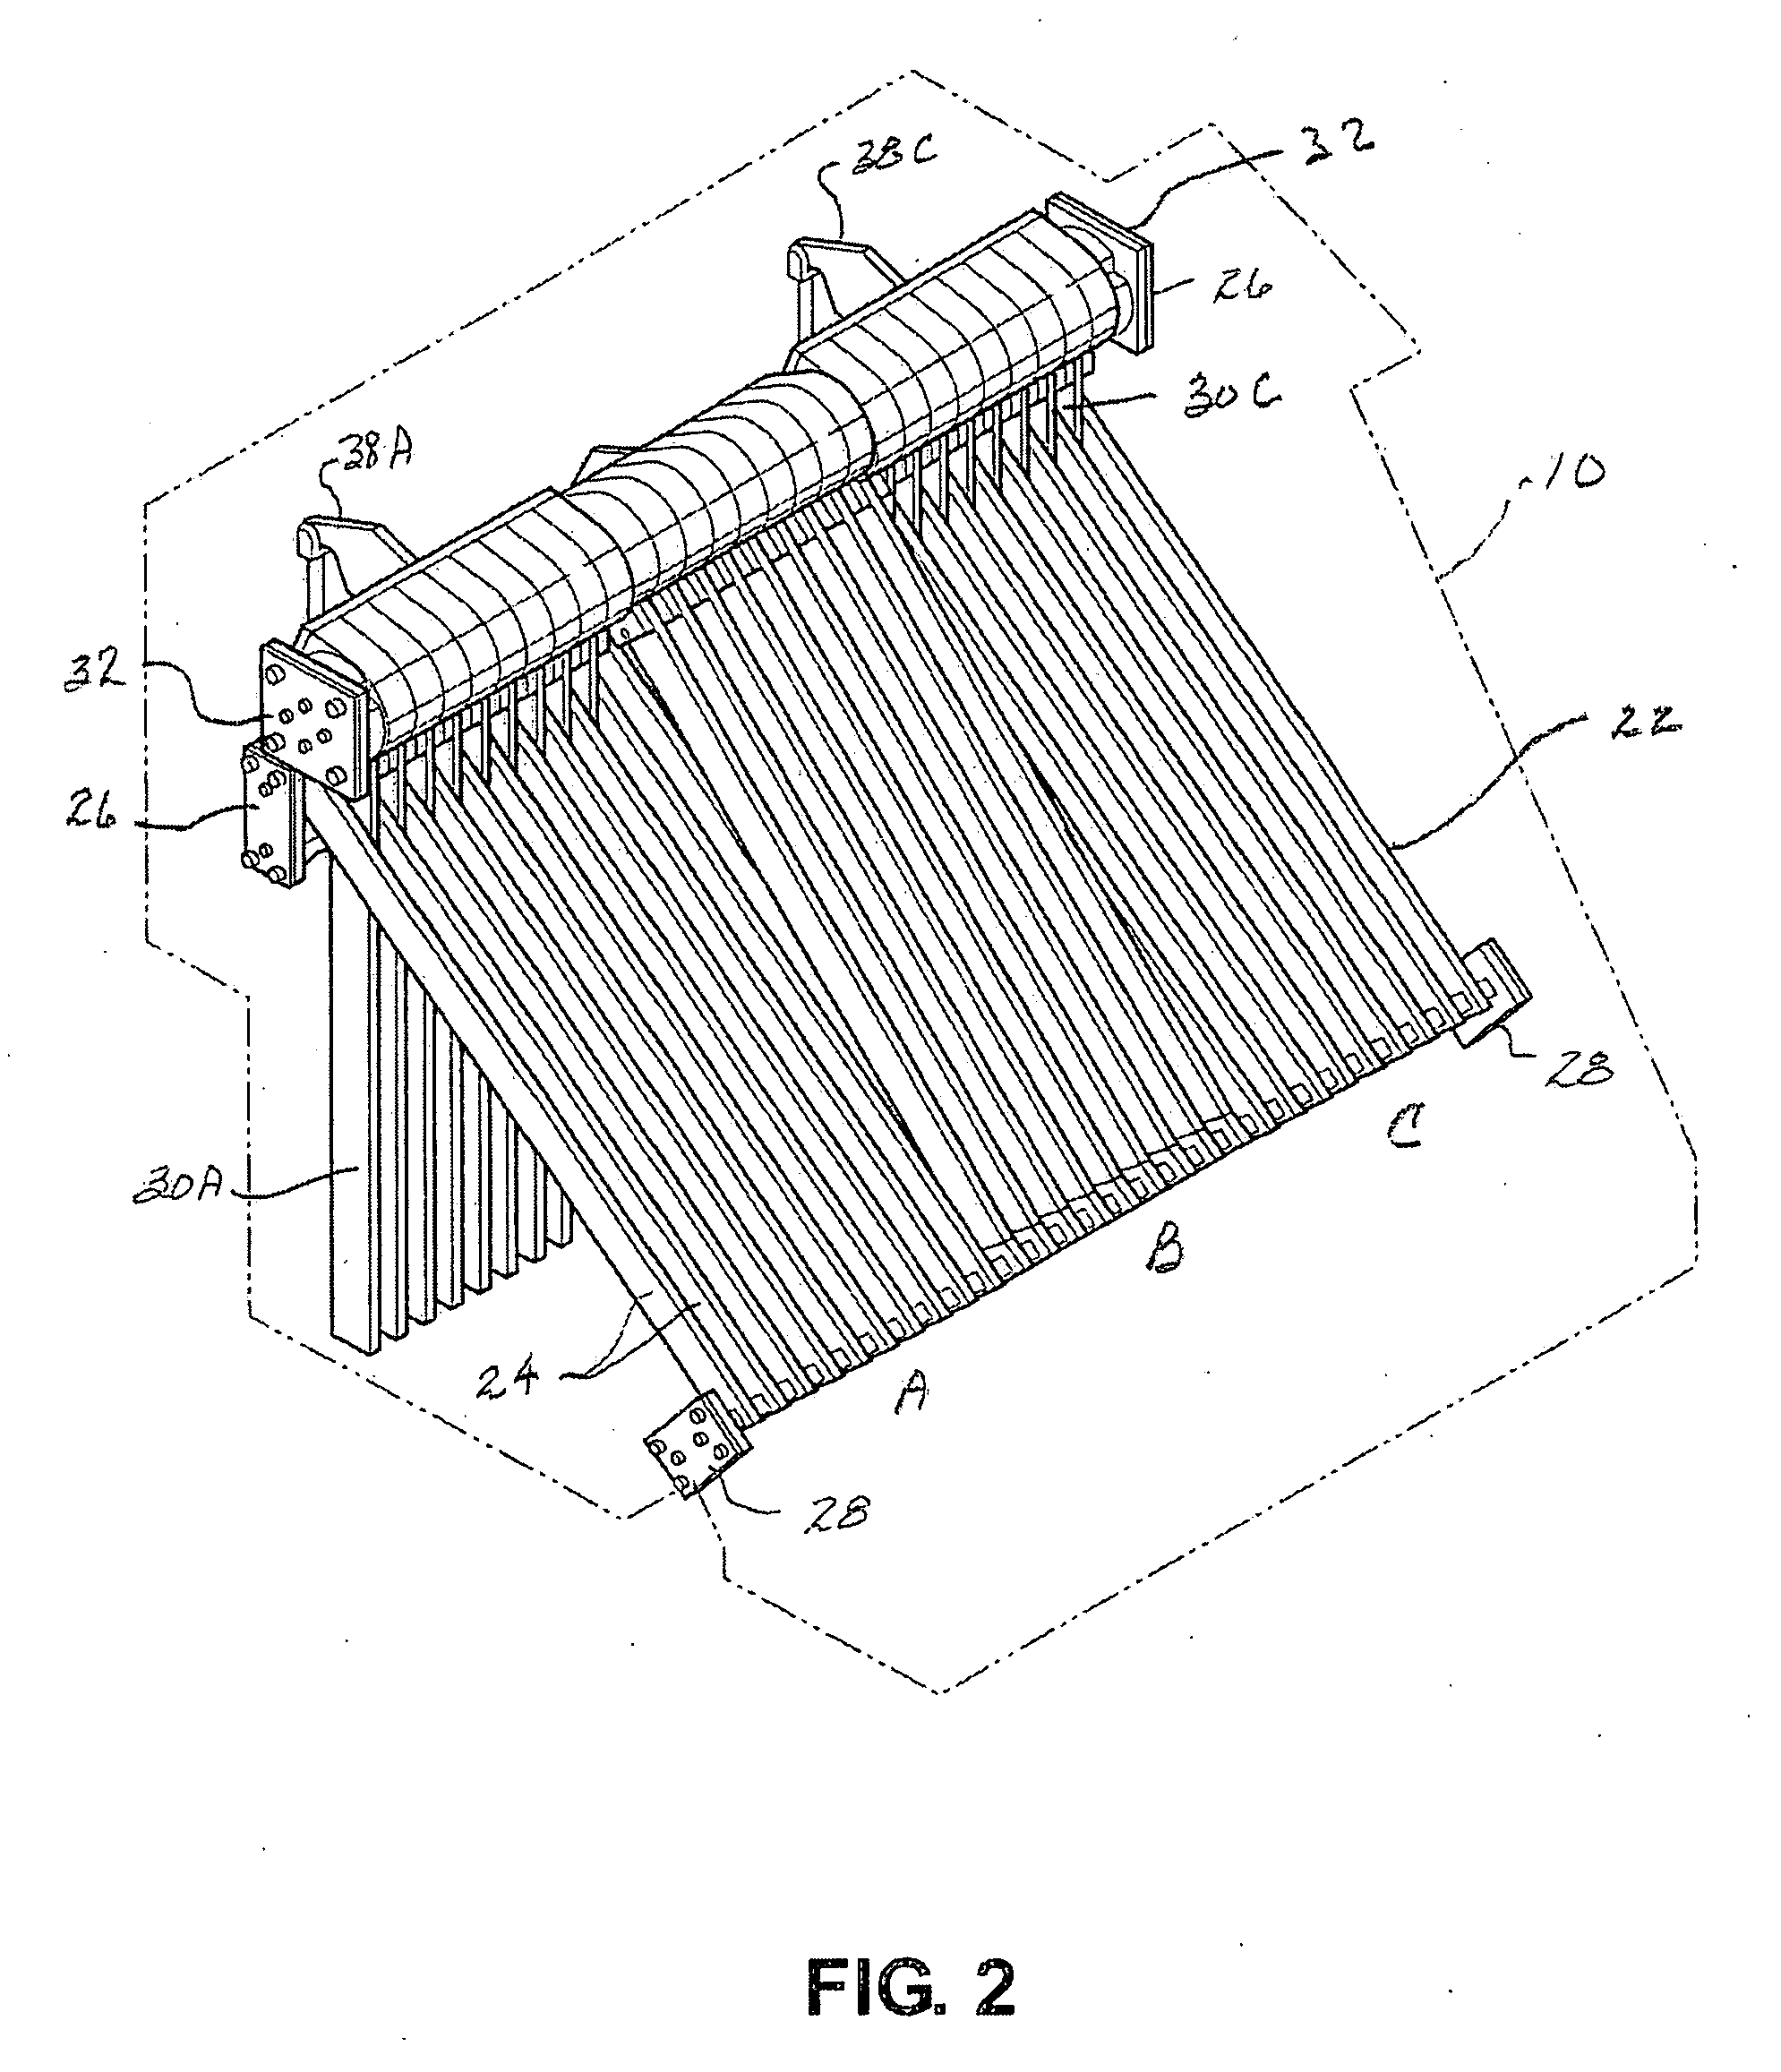 Self-cleaning coal separator grids with multiple cleaning combs